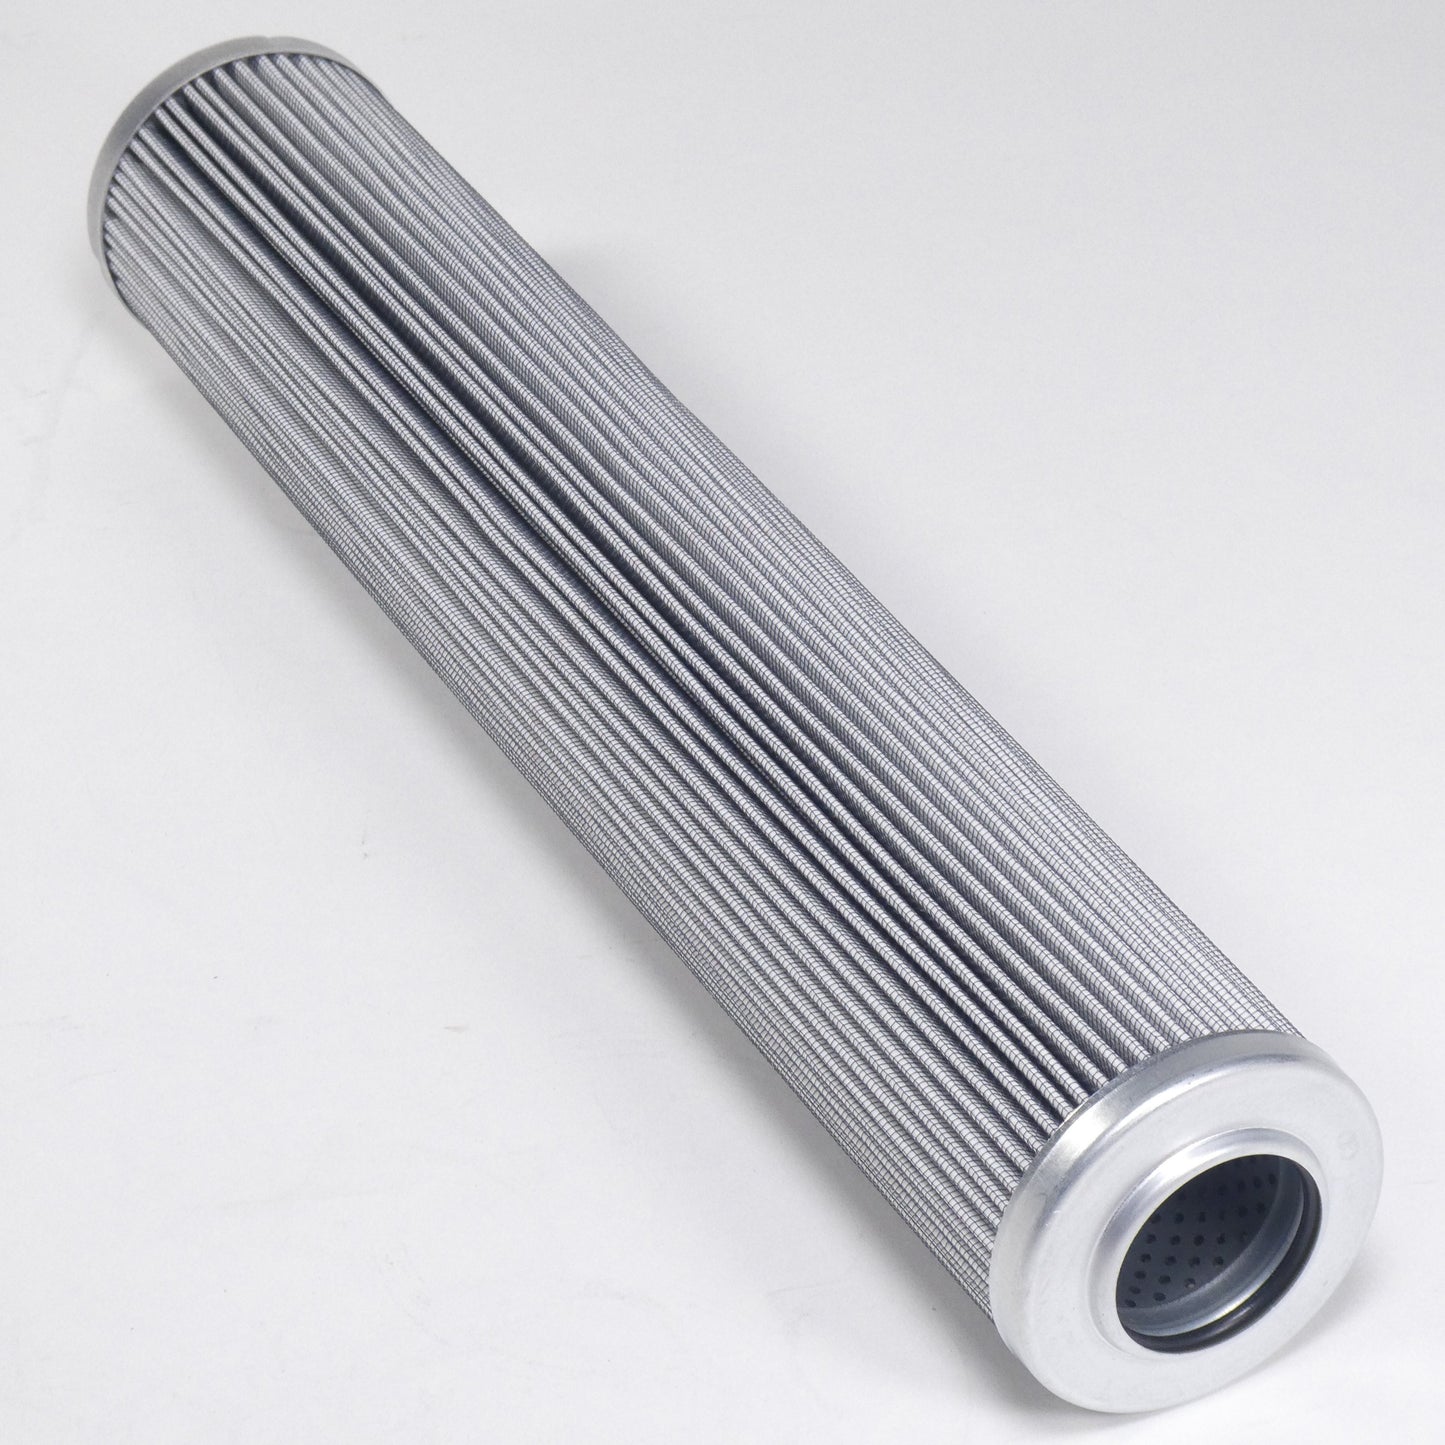 Hydrafil Replacement Filter Element for Parker R960-H-1603H